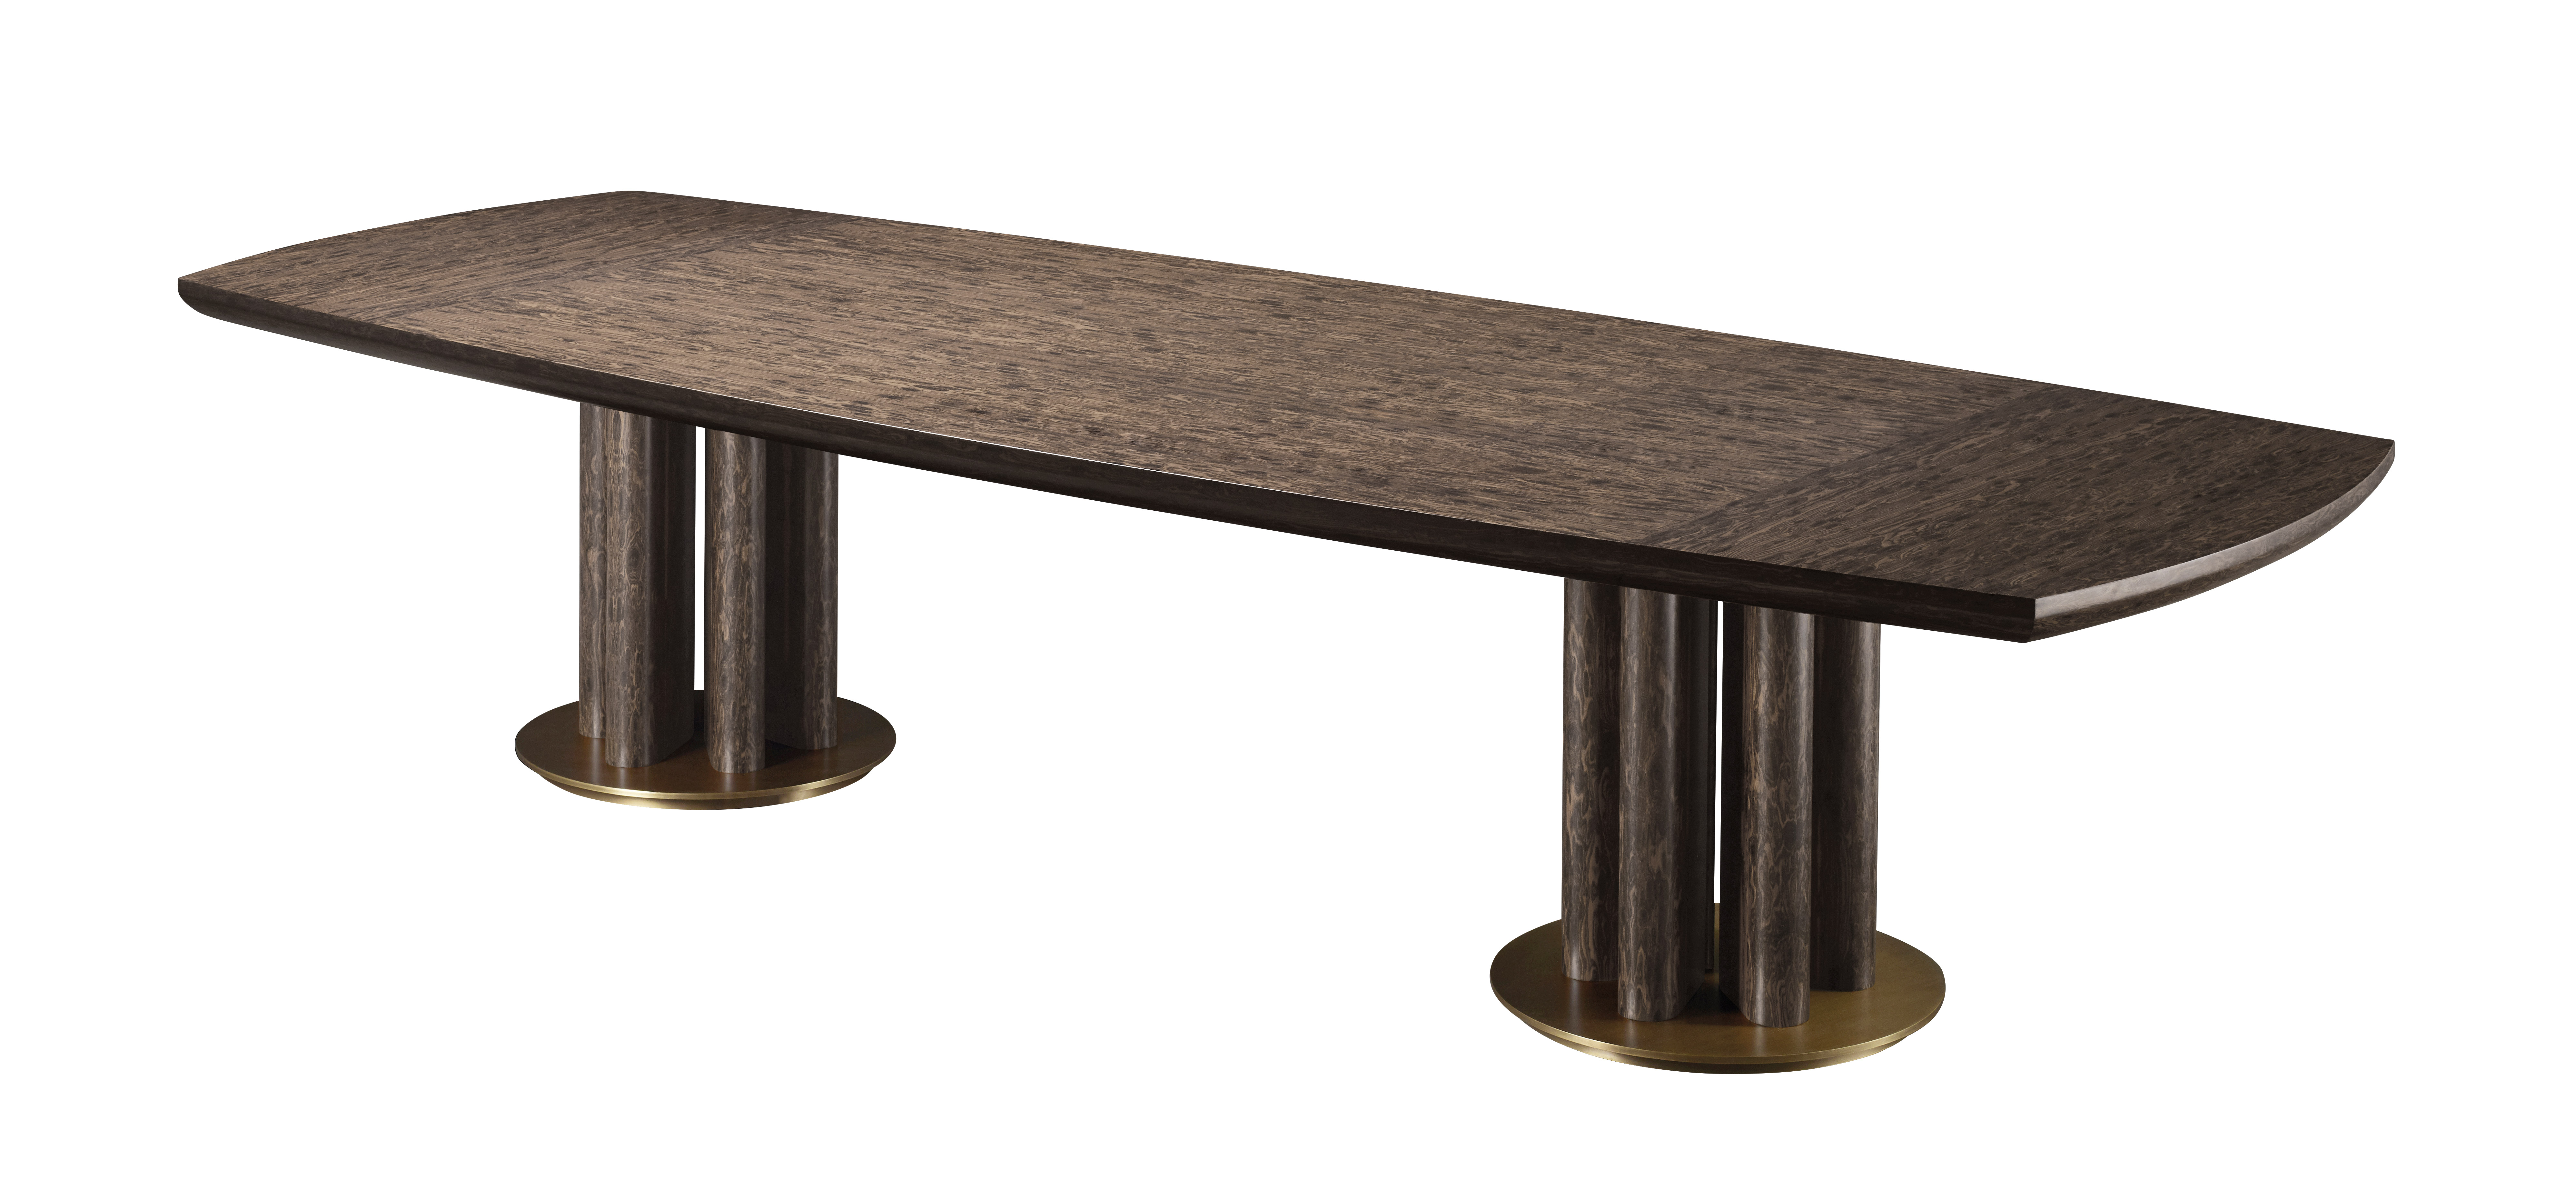 Orazio is a wooden and bronze dining table, from Promemoria's Amaranthine Tales collection | Promemoria